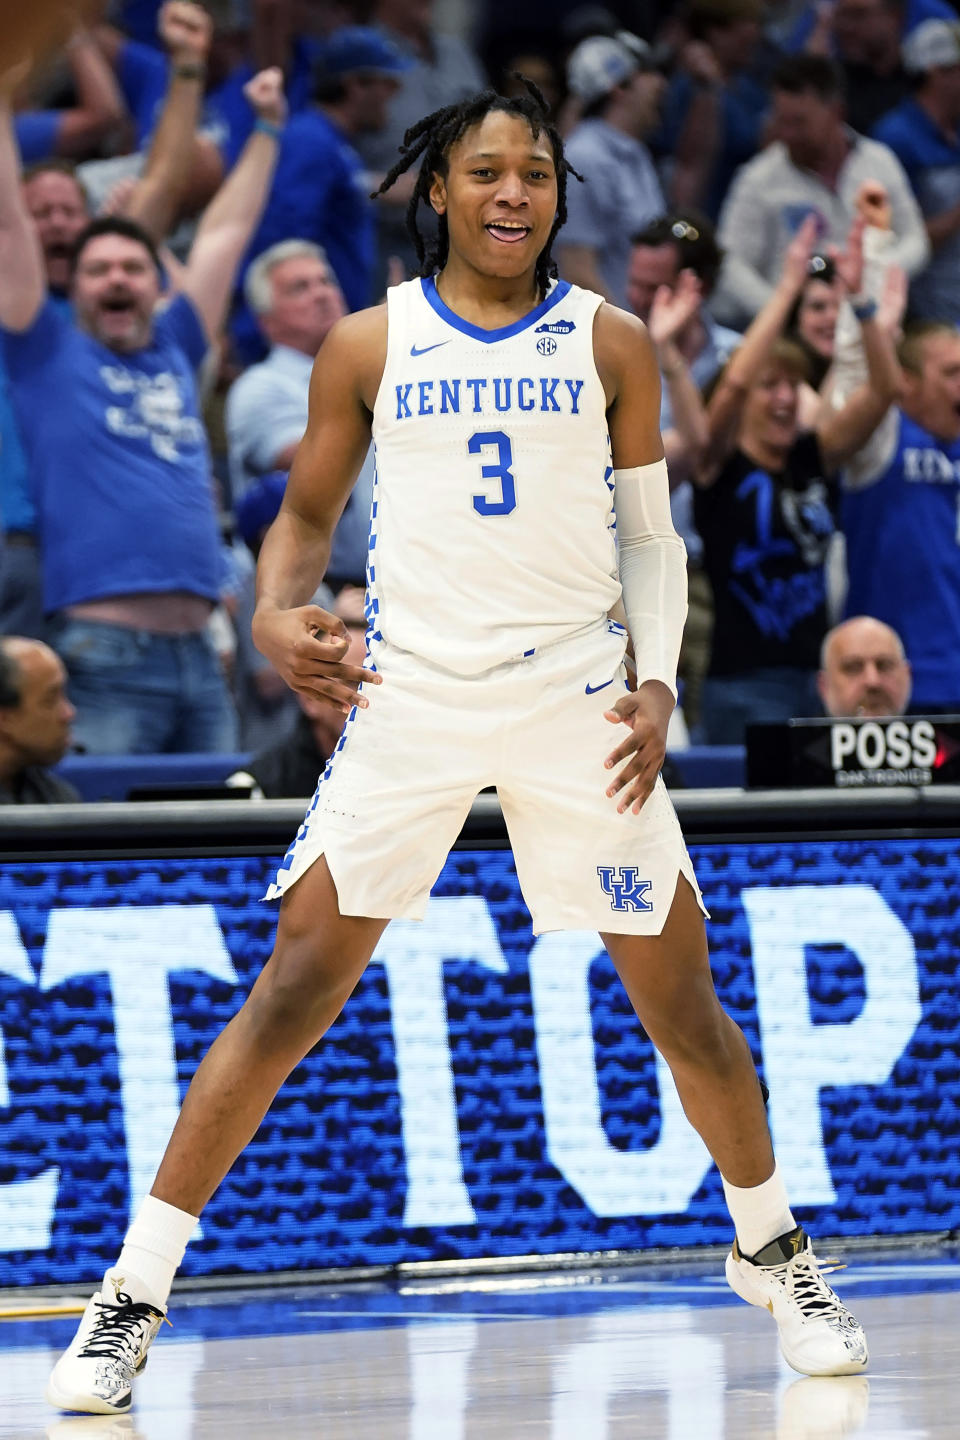 Kentucky guard TyTy Washington Jr. (3) reacts to a 3-point basket against Vanderbilt during the second half of an NCAA college basketball game in the Southeastern Conference men's tournament Friday, March 11, 2022, in Tampa, Fla. (AP Photo/Chris O'Meara)